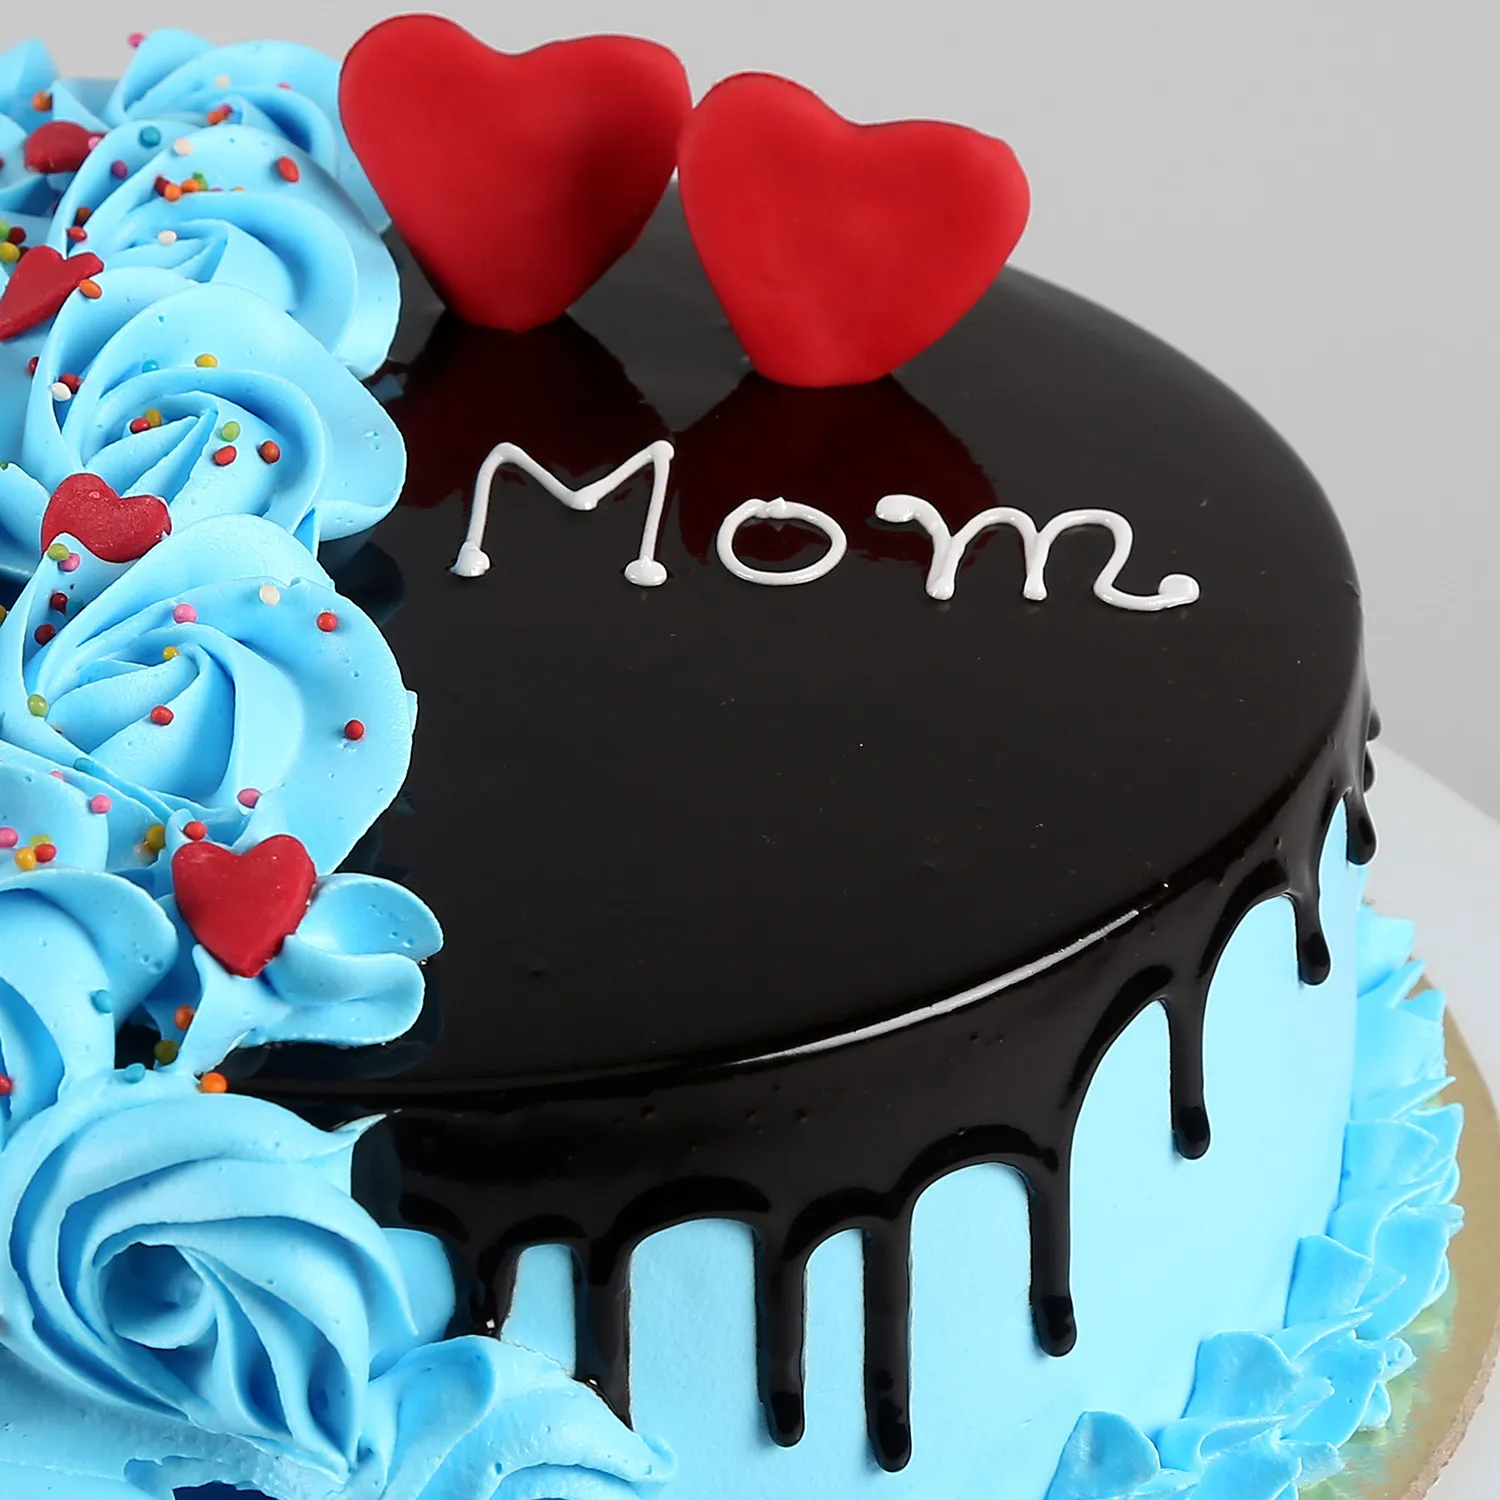 Mothers Day Special Love You Mom Cake delivery in India | Tasty Treat Cakes